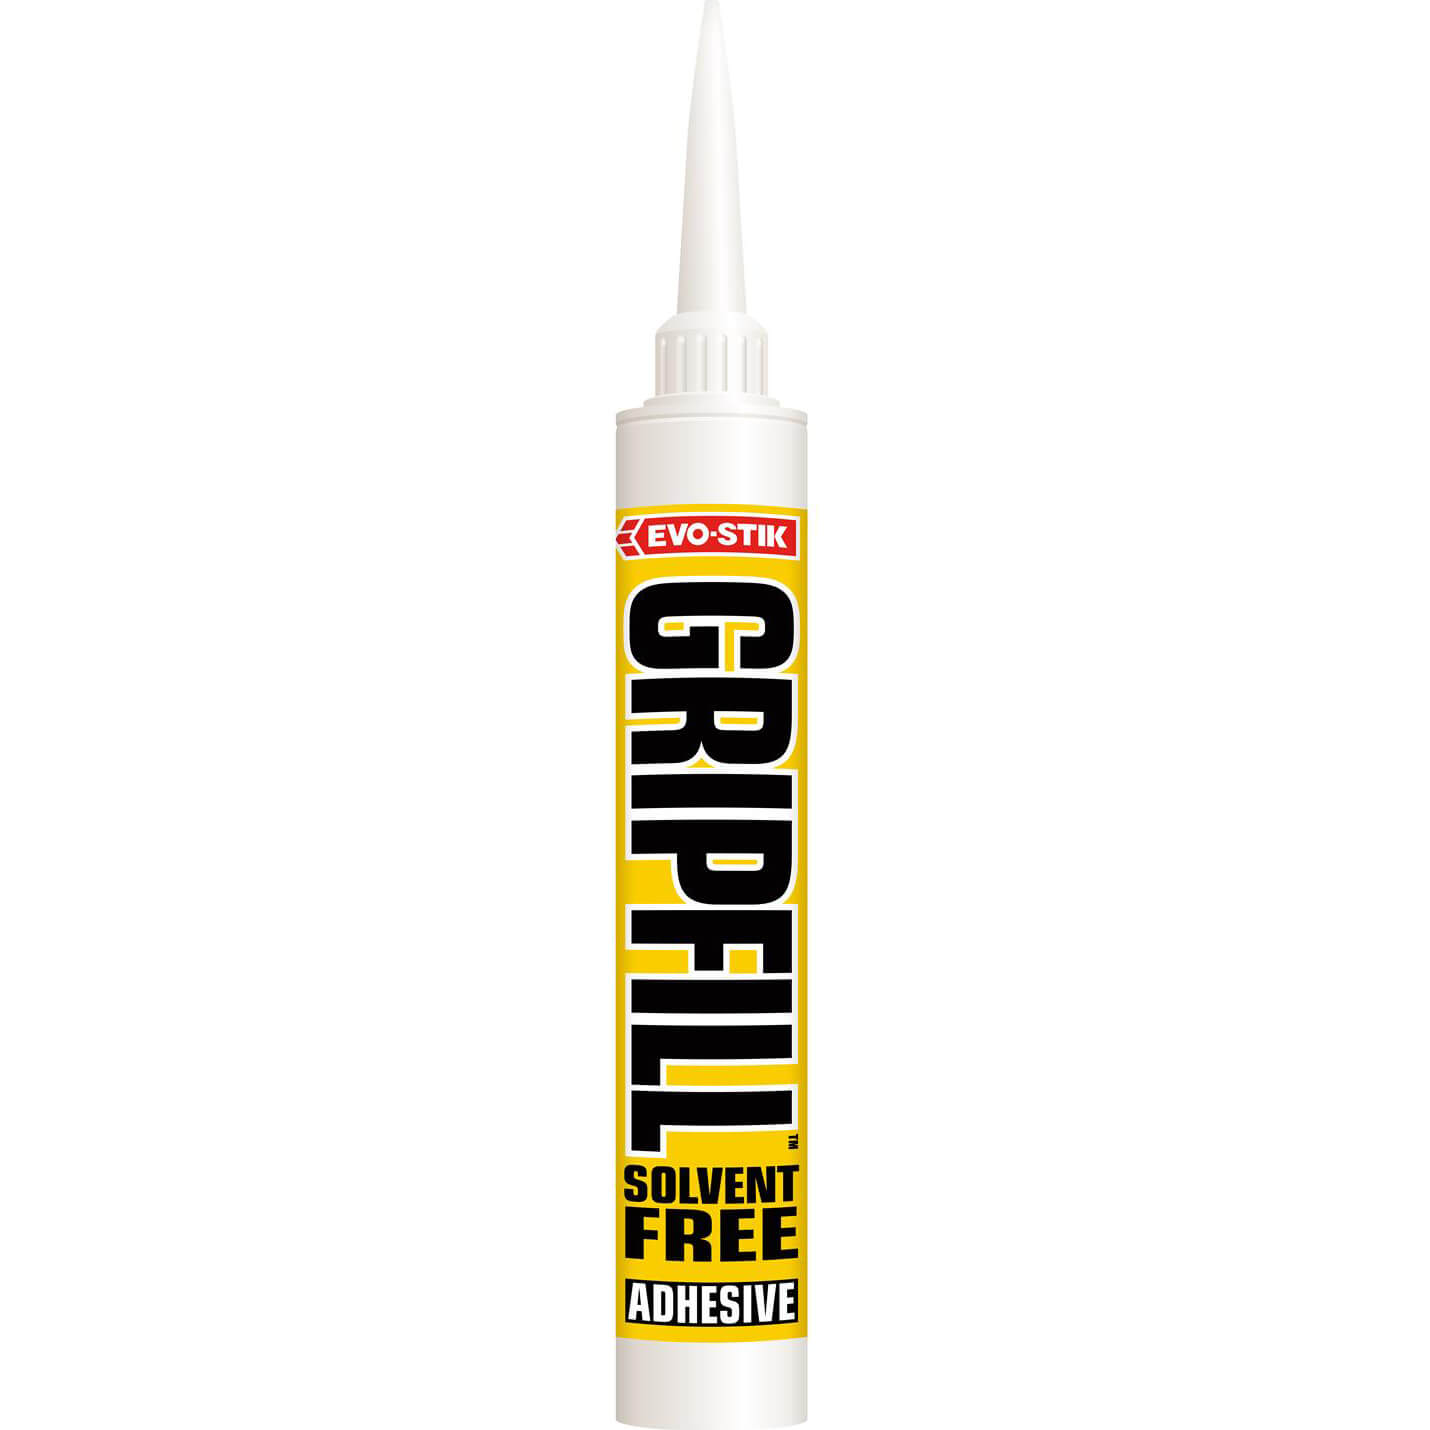 Image of Evotik Gripfill Solvent Free Grab Adhesive 310ml